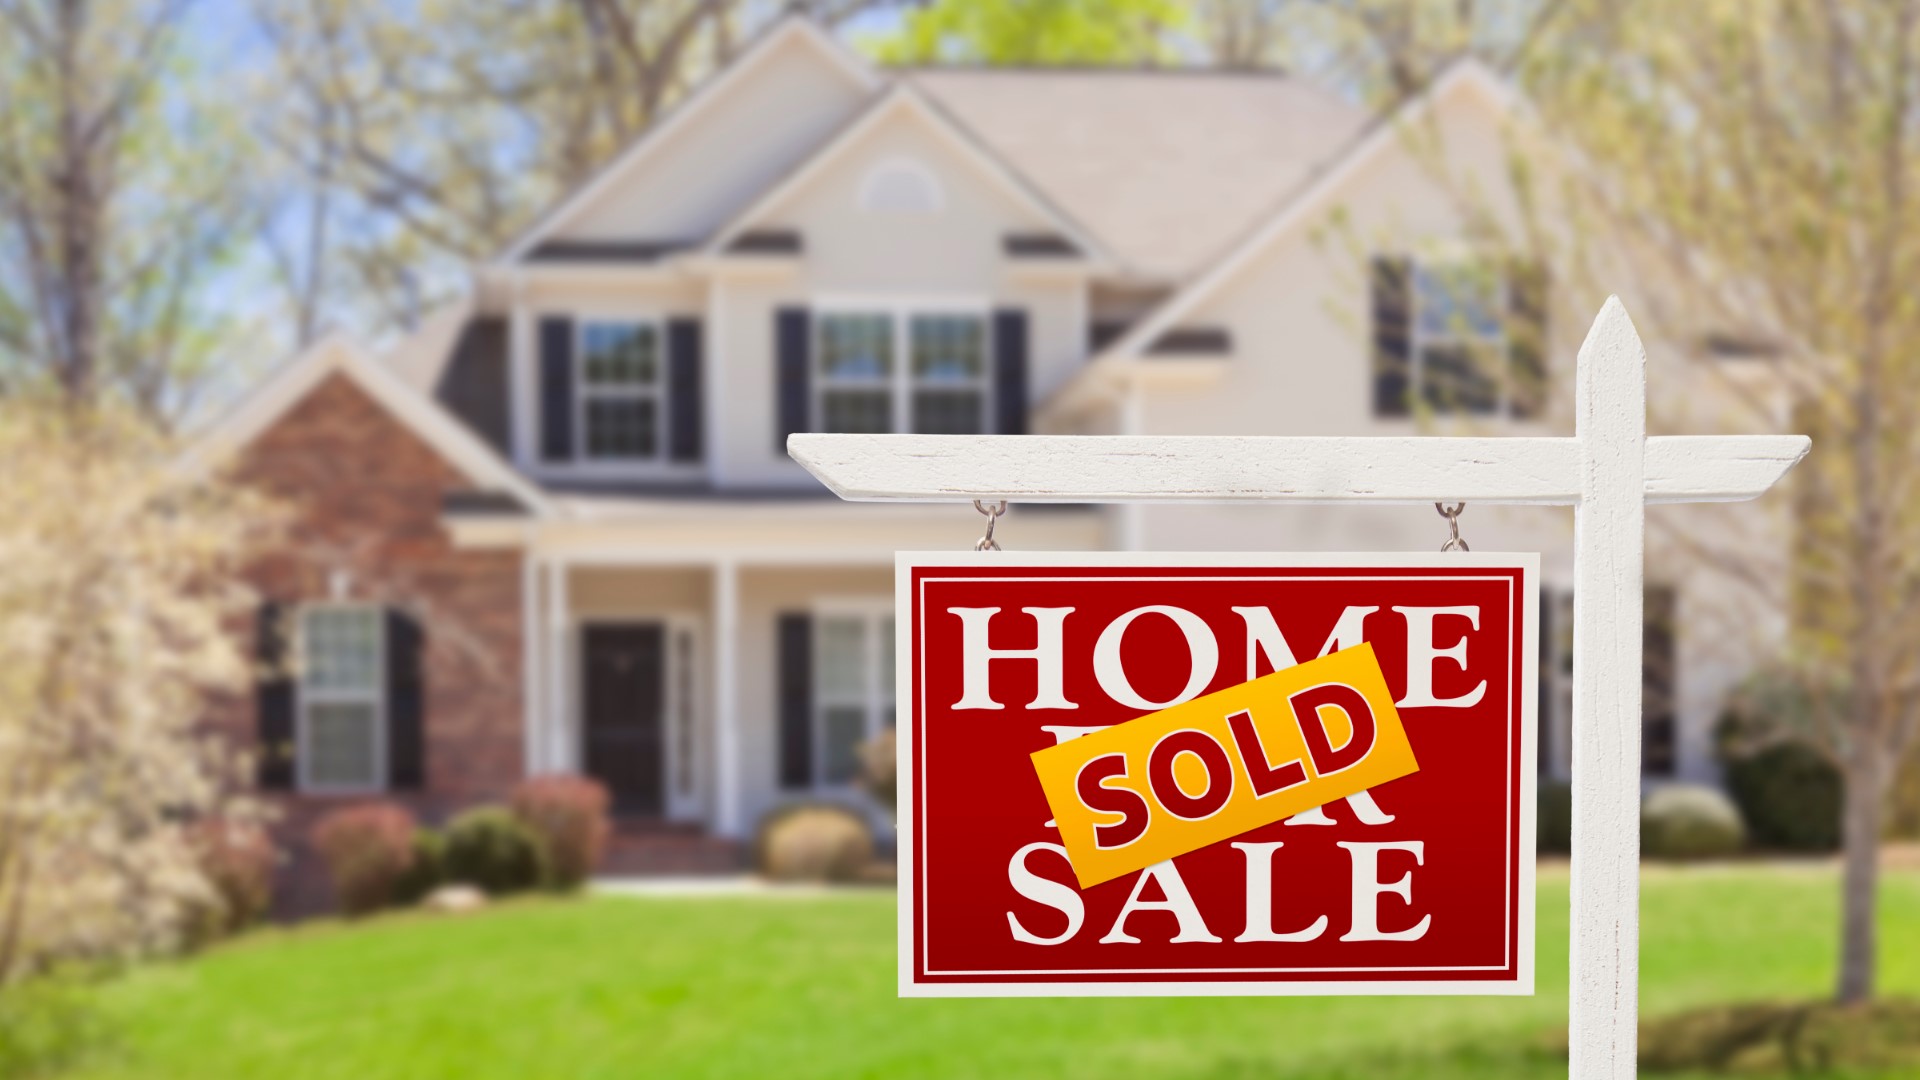 Dee Kerr of Total Retirements has all the questions to consider when you think you're ready to buy a house.